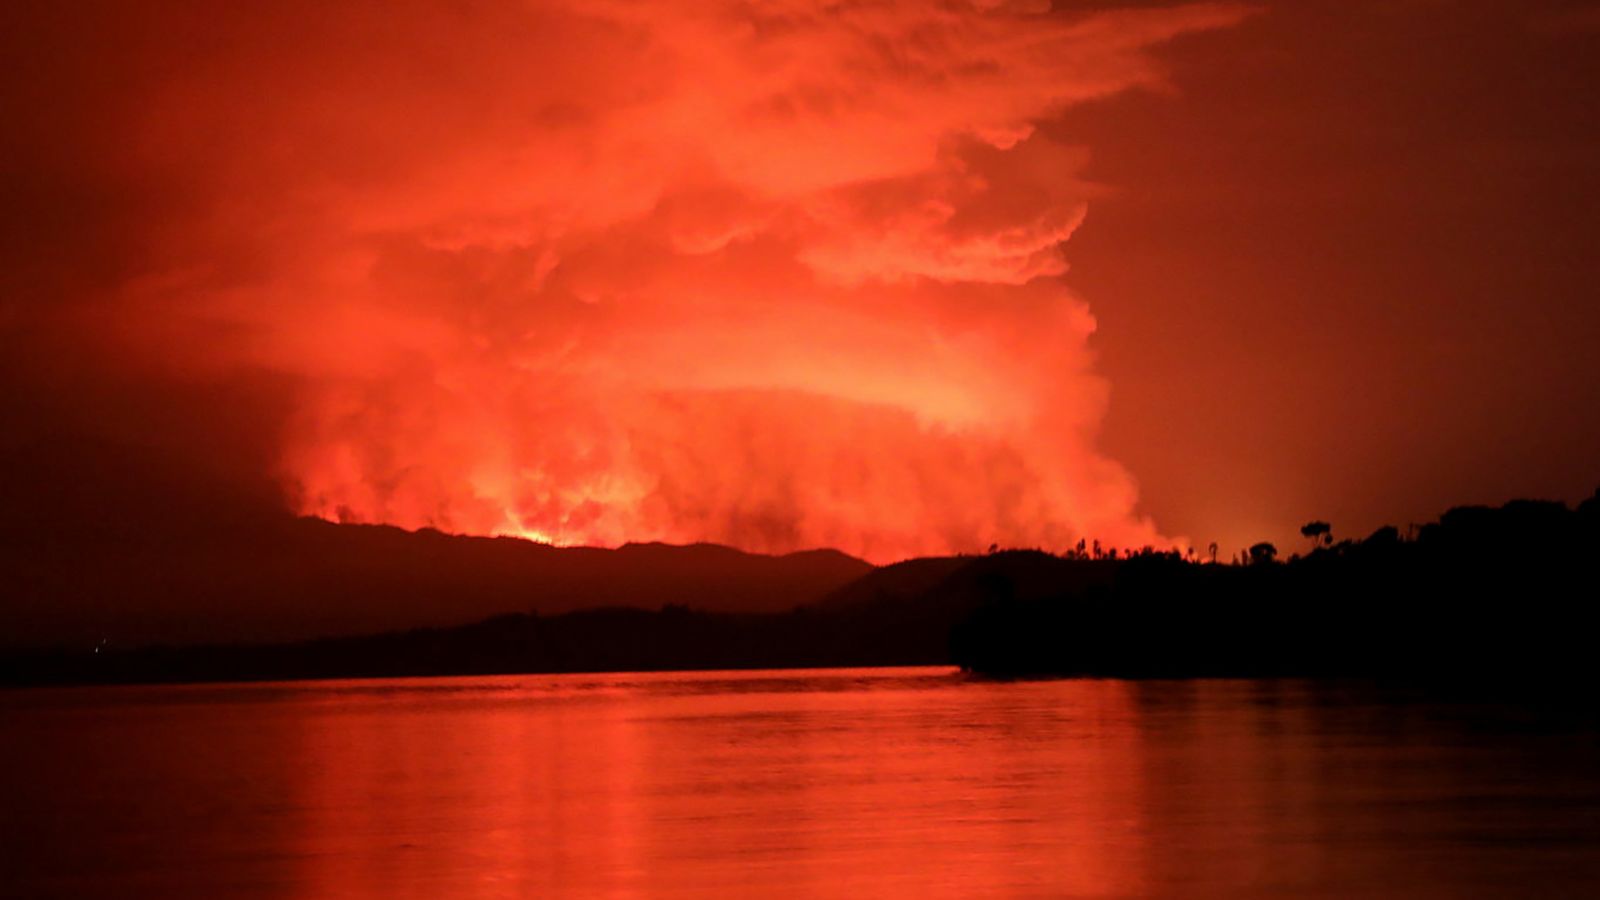 The volcano's smoke and flames are seen from Tchegera Island on Lake Kivu, near Goma, on May 22.